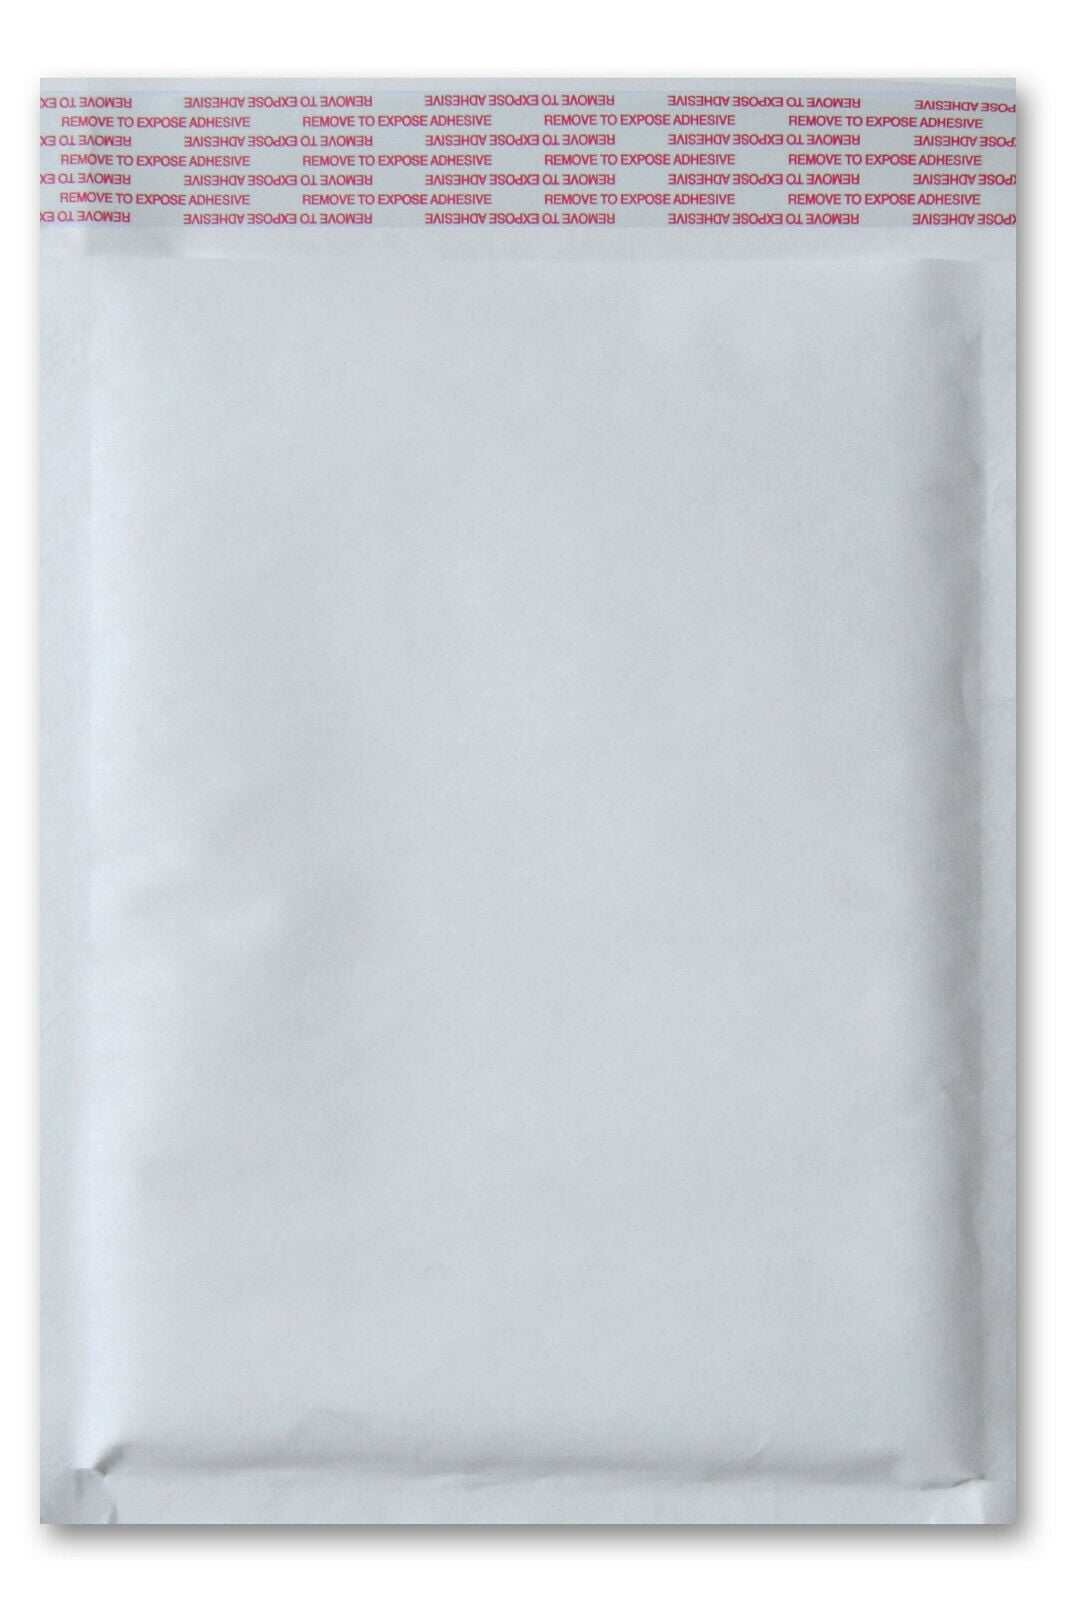 200 Small A/000 165mm x 100mm White Bubble Padded Post Bag Envelopes 